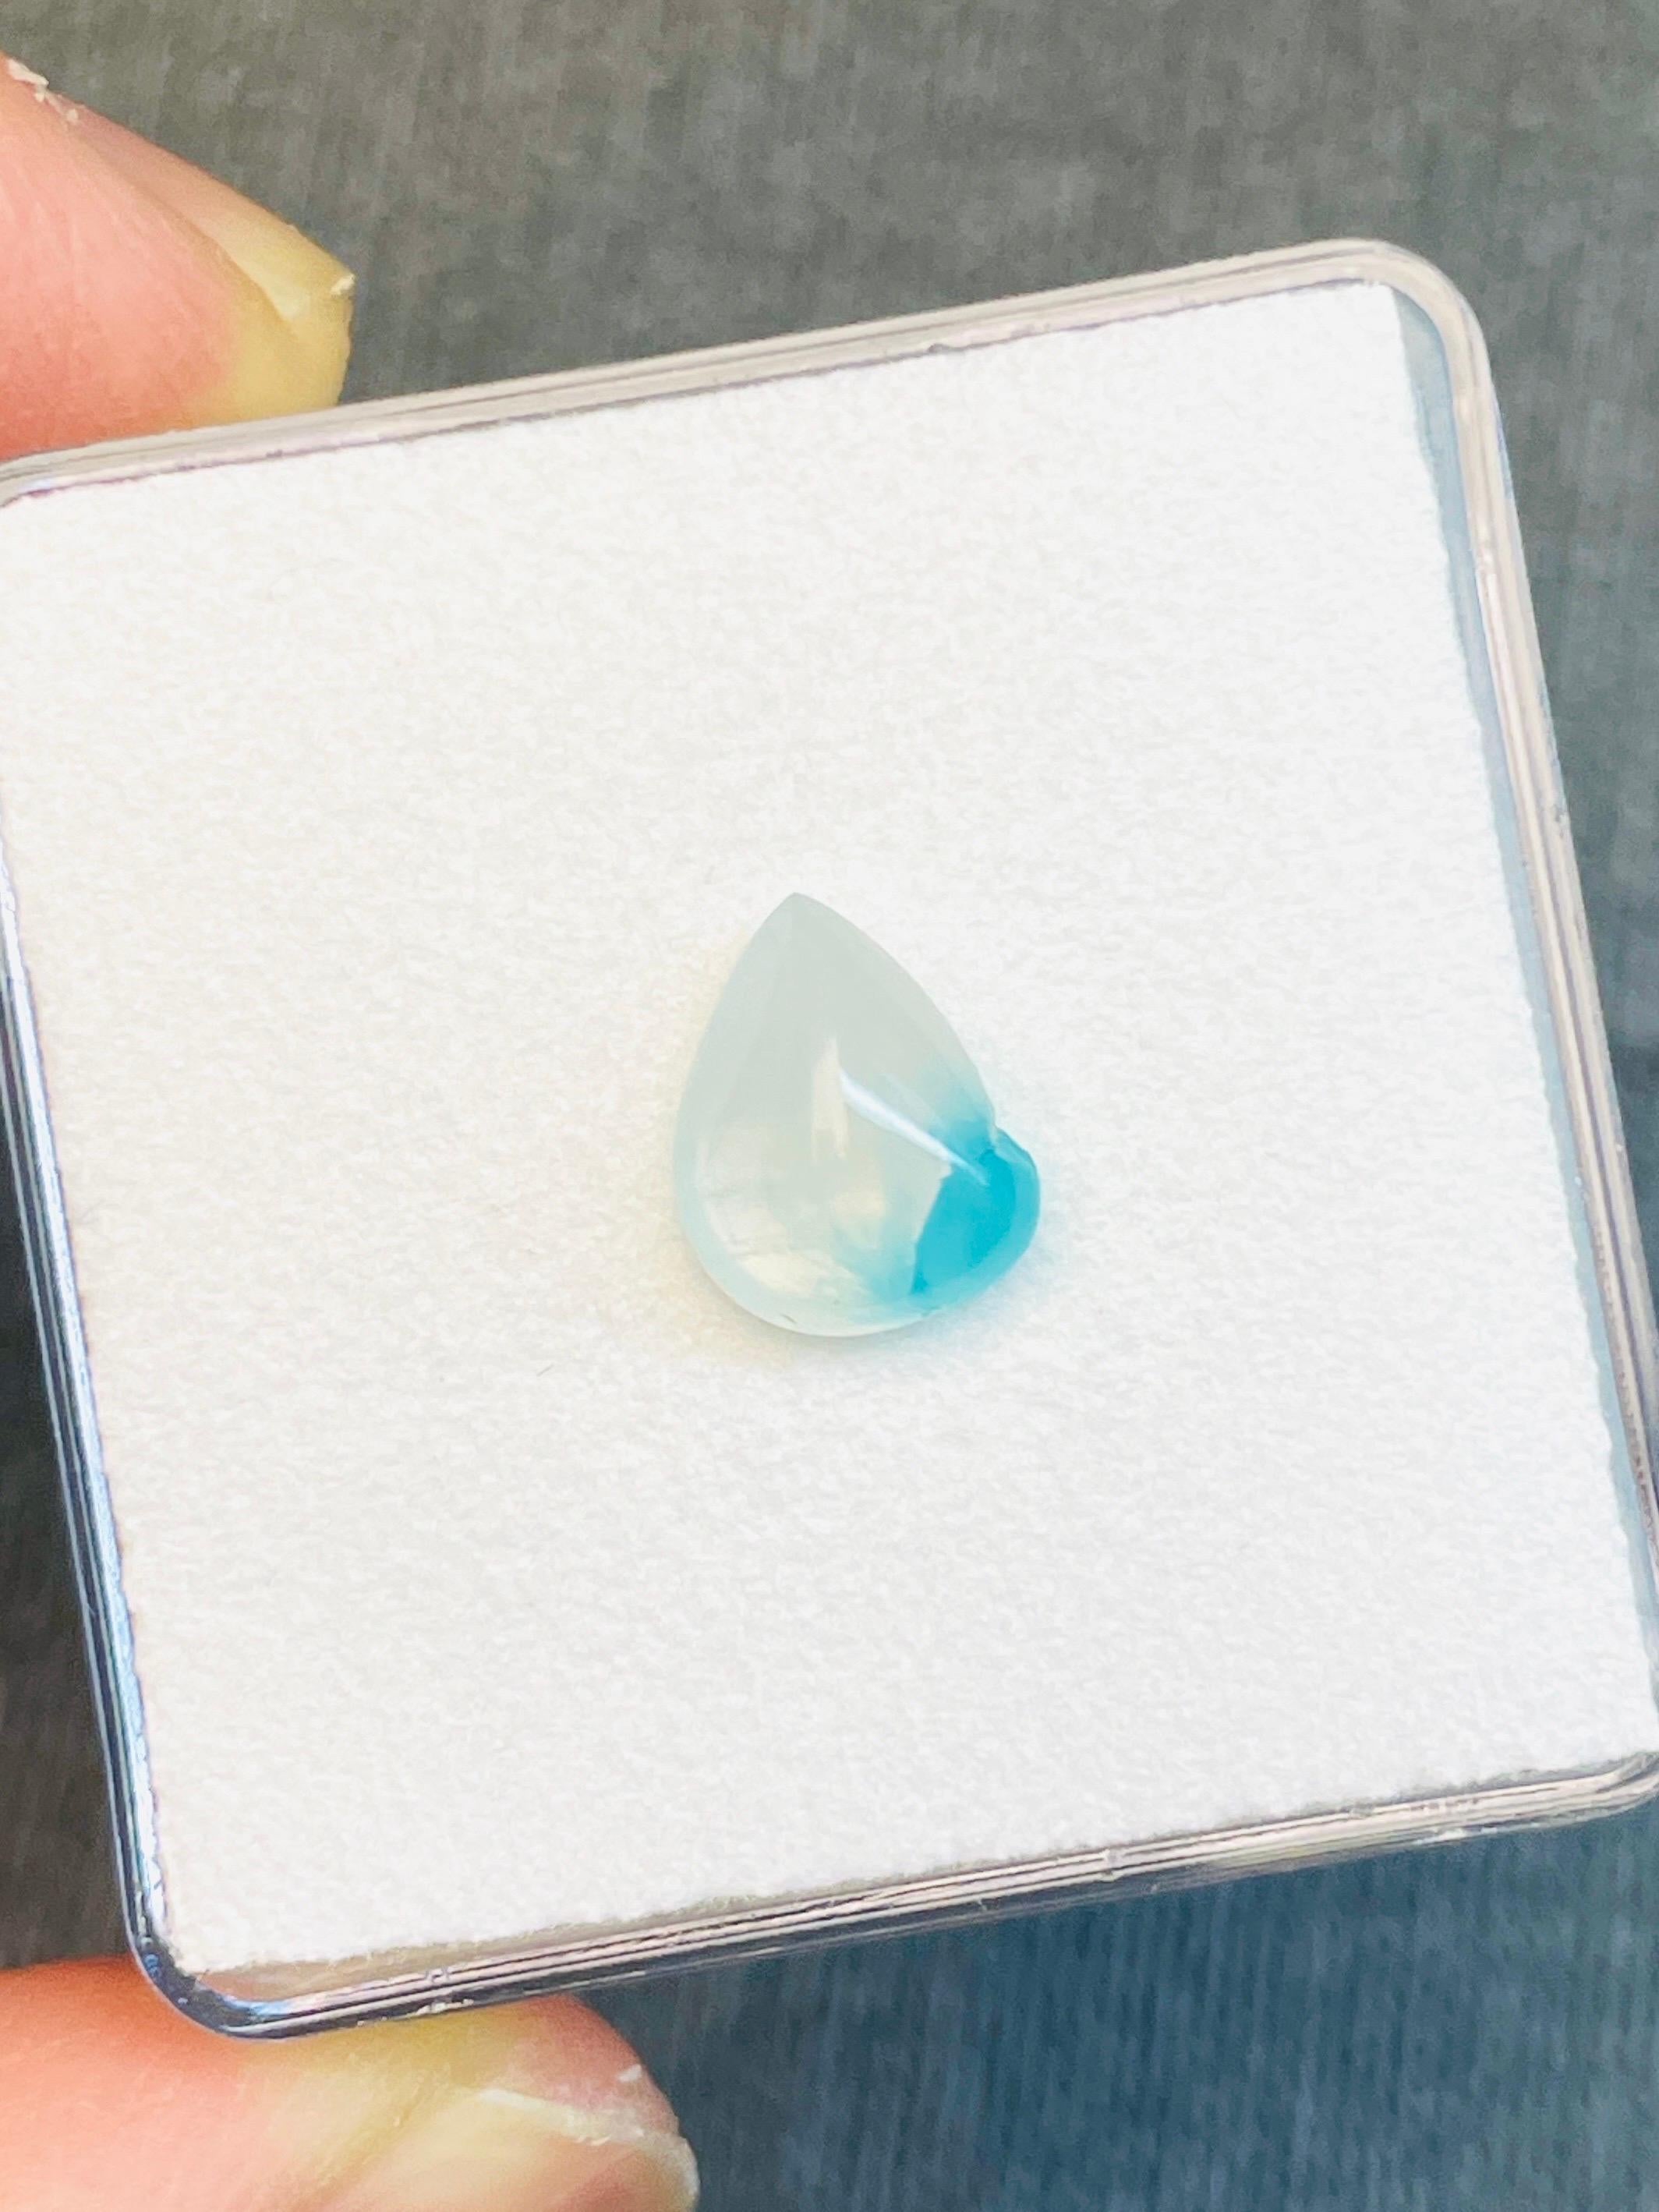 Pure beauty color paraiba Brazil Crystal with special neon blue color Unheated 

Name: Brazil paraiba Unheated 
Weight:1.93ct
Size: 9.76*7.92*4.58mm
Origin: Brazil 
Color: white and neon blue 
Clarity: Eye clean 
Cut : standard cut